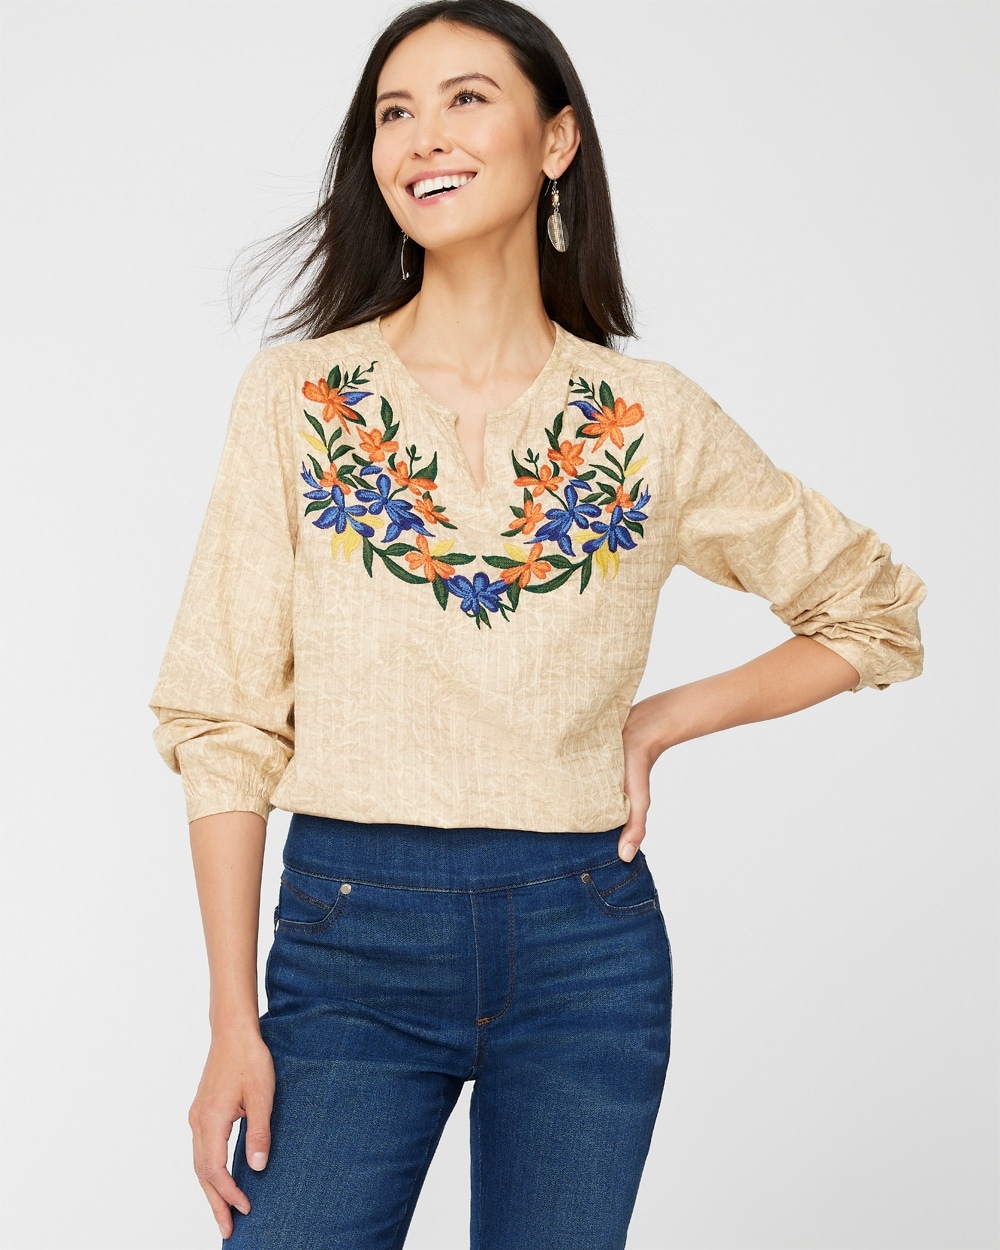 Crackle Wash Embroidered Popover Top